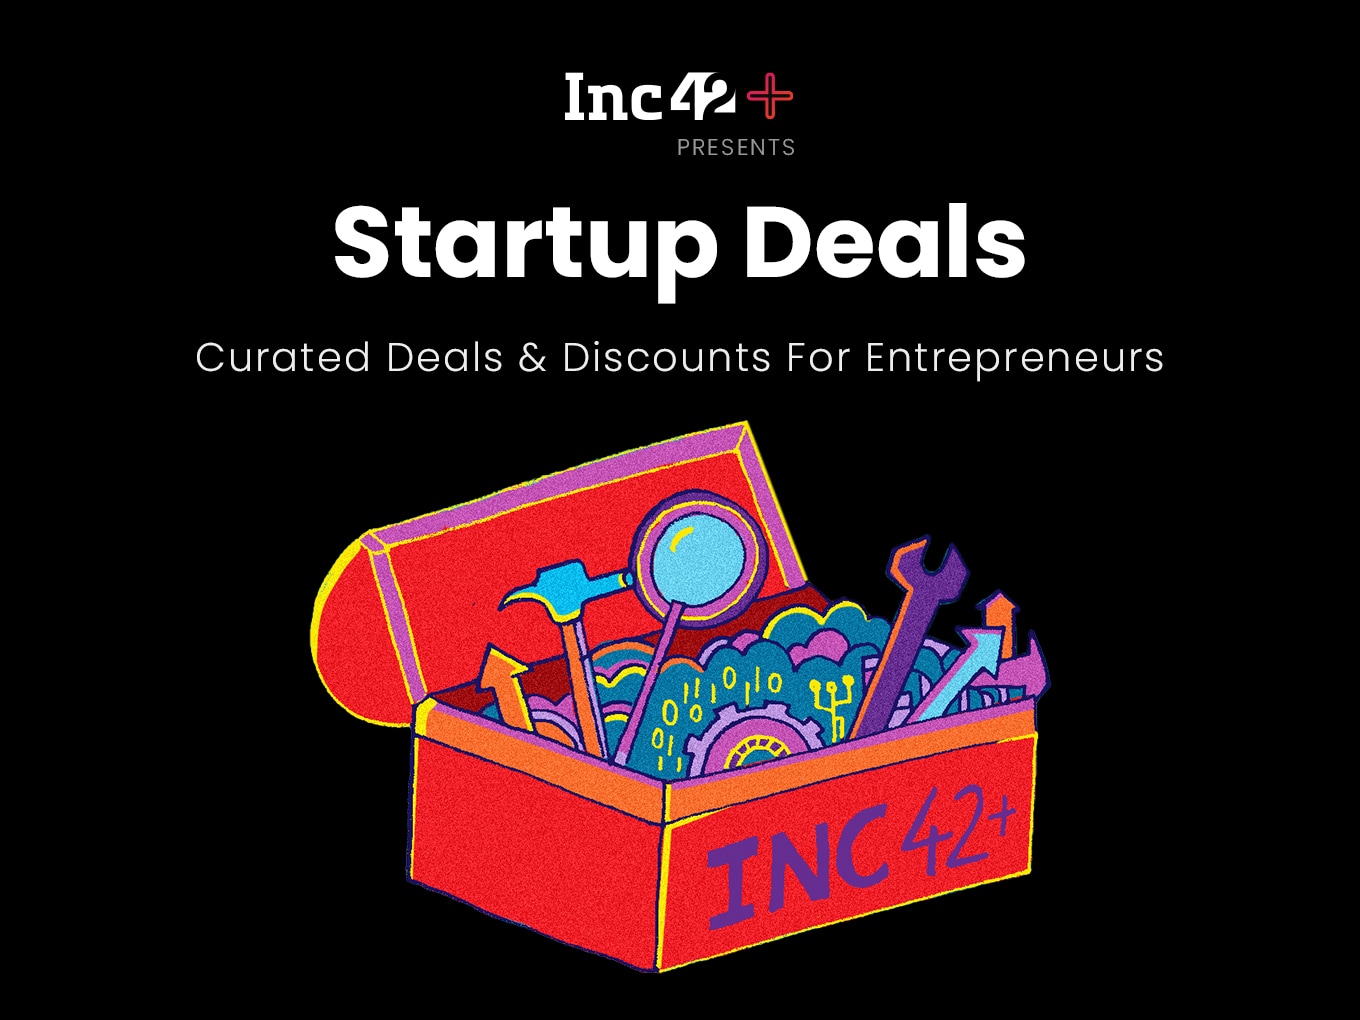 Startup Deals By Inc42 for Inc42+ members